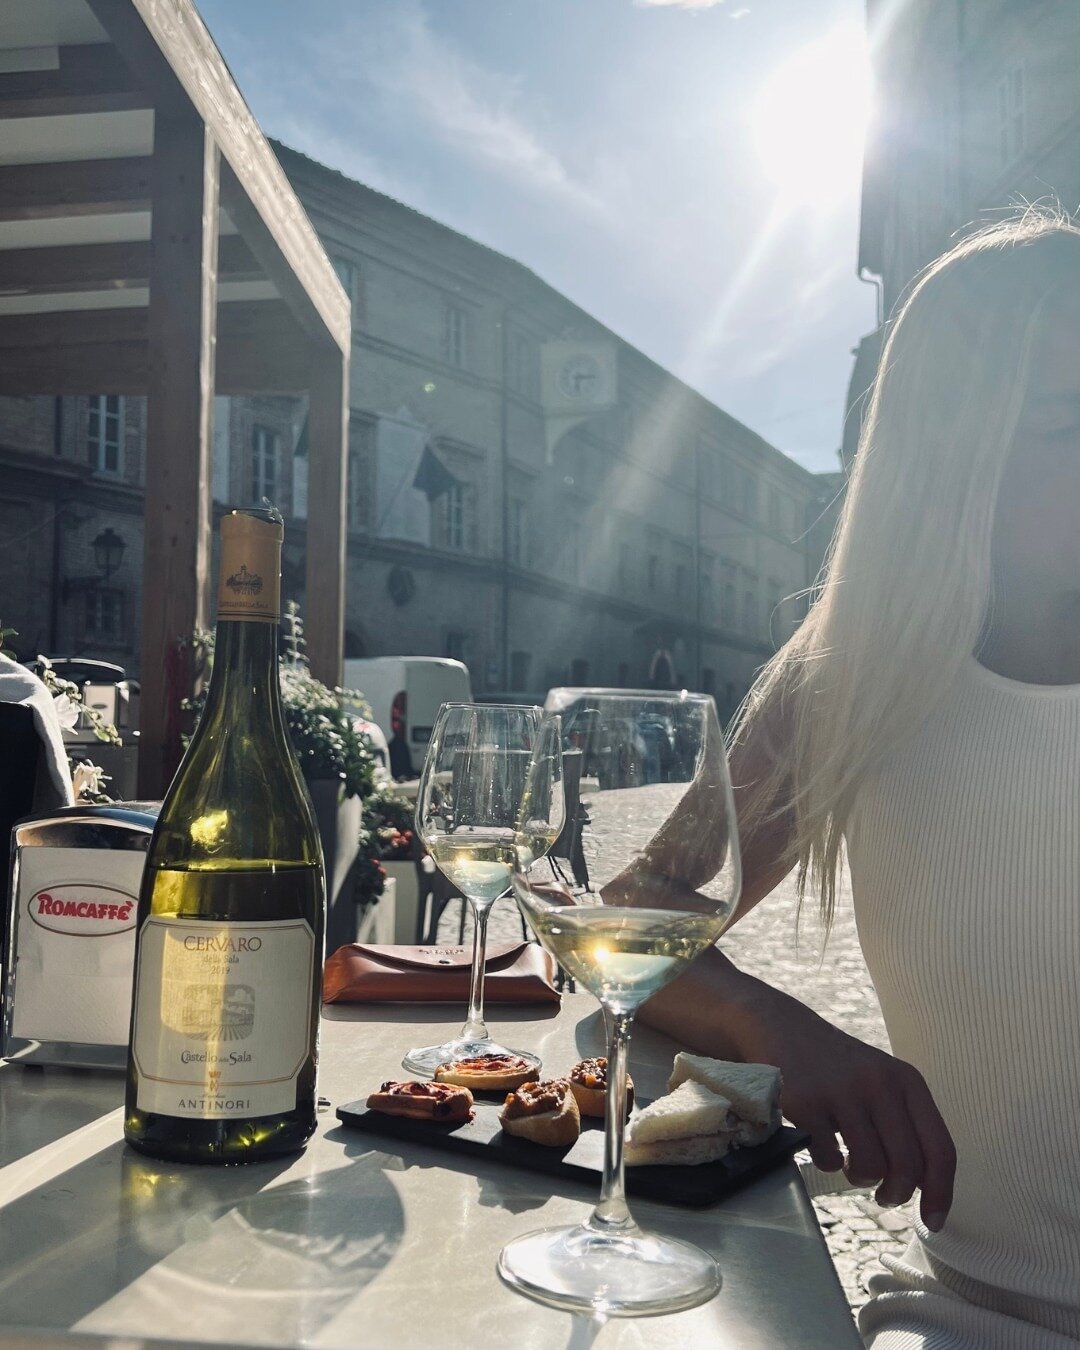 One of our favourite spots in town, Bar Gelateria Tre Archi is located right in the centre of the square, offering the best views for watching the world go by.

With coffee, wine and ice cream on the menu, everyone has the opportunity to experience t